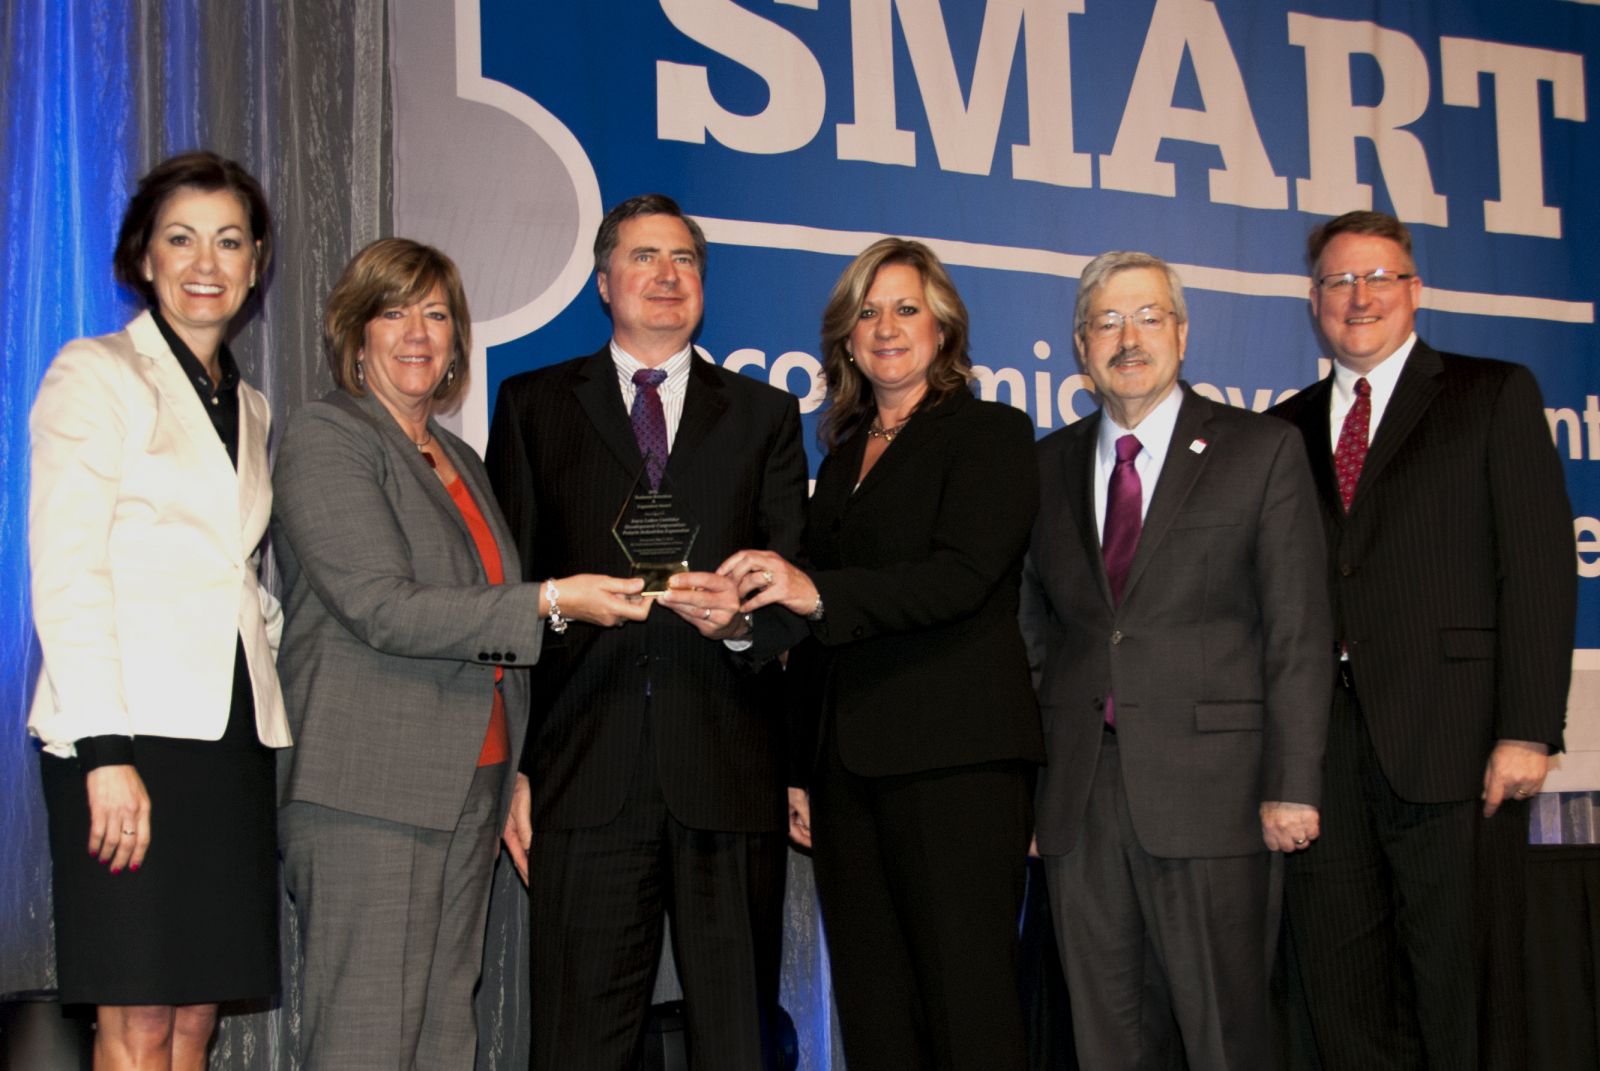 Iowa Lakes Corridor receives award for Business Retention & Expansion efforts Photo